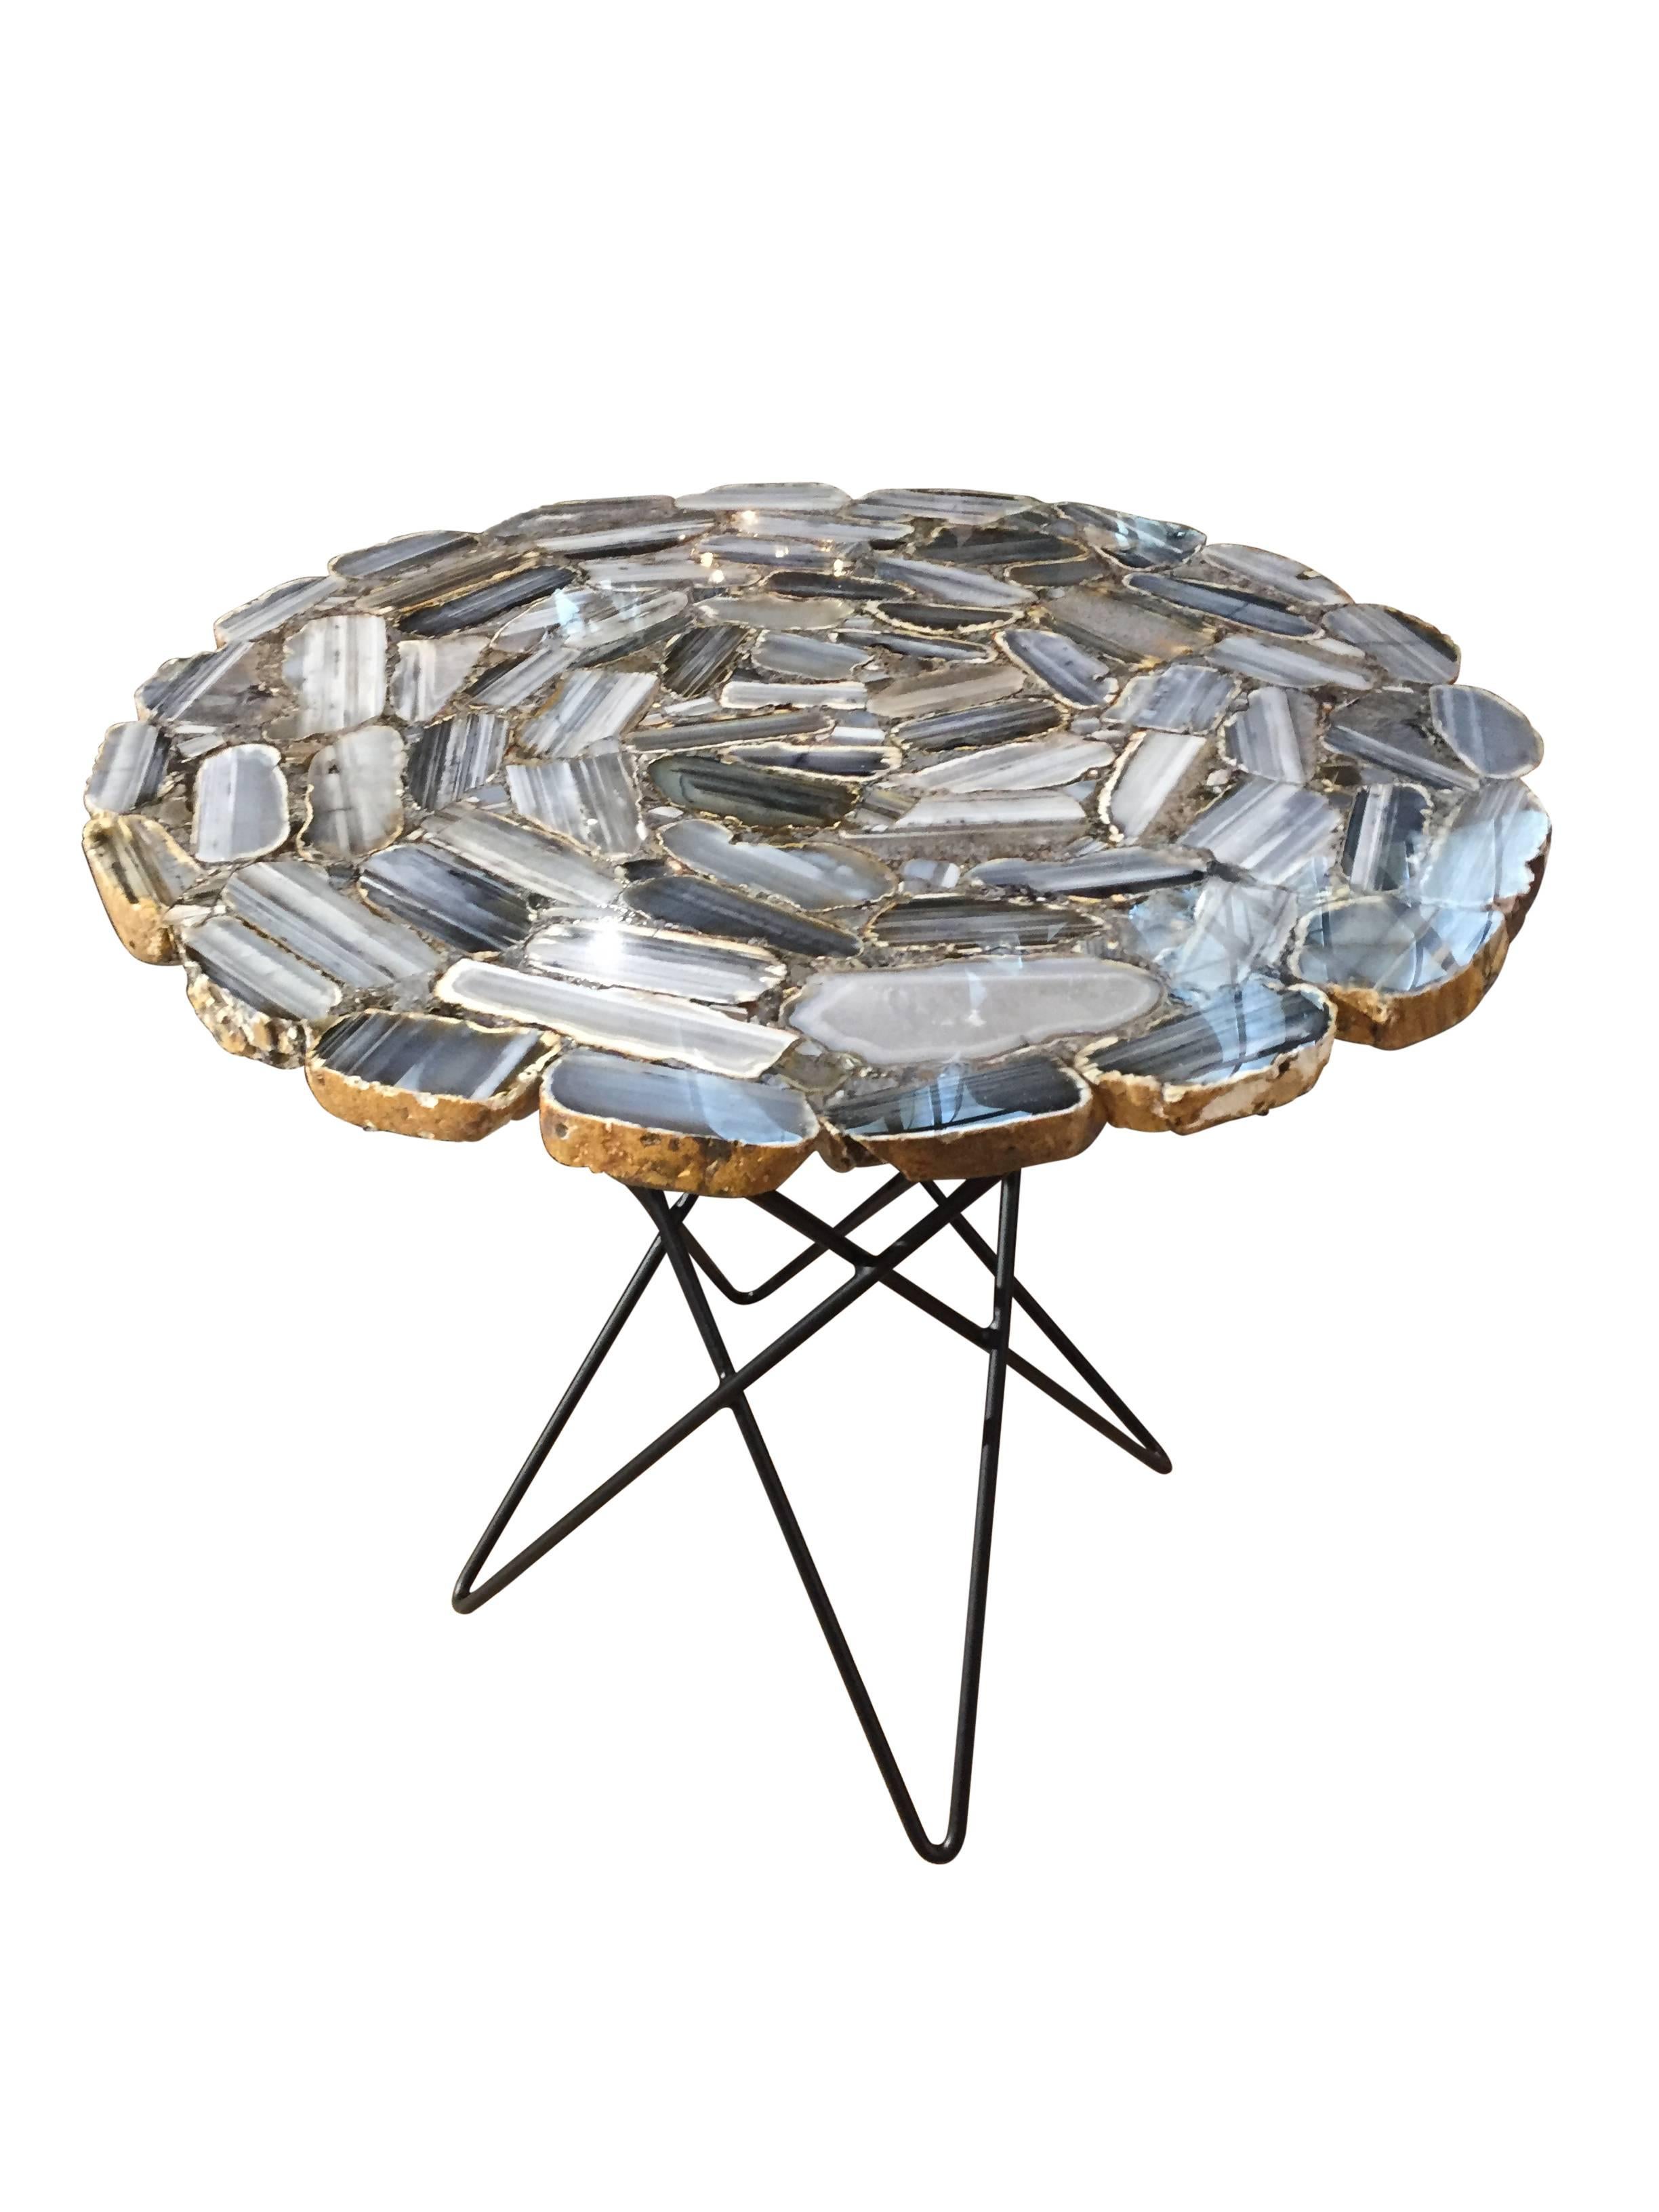 Agate Side Table with Steel Base In Excellent Condition For Sale In Montecito, CA